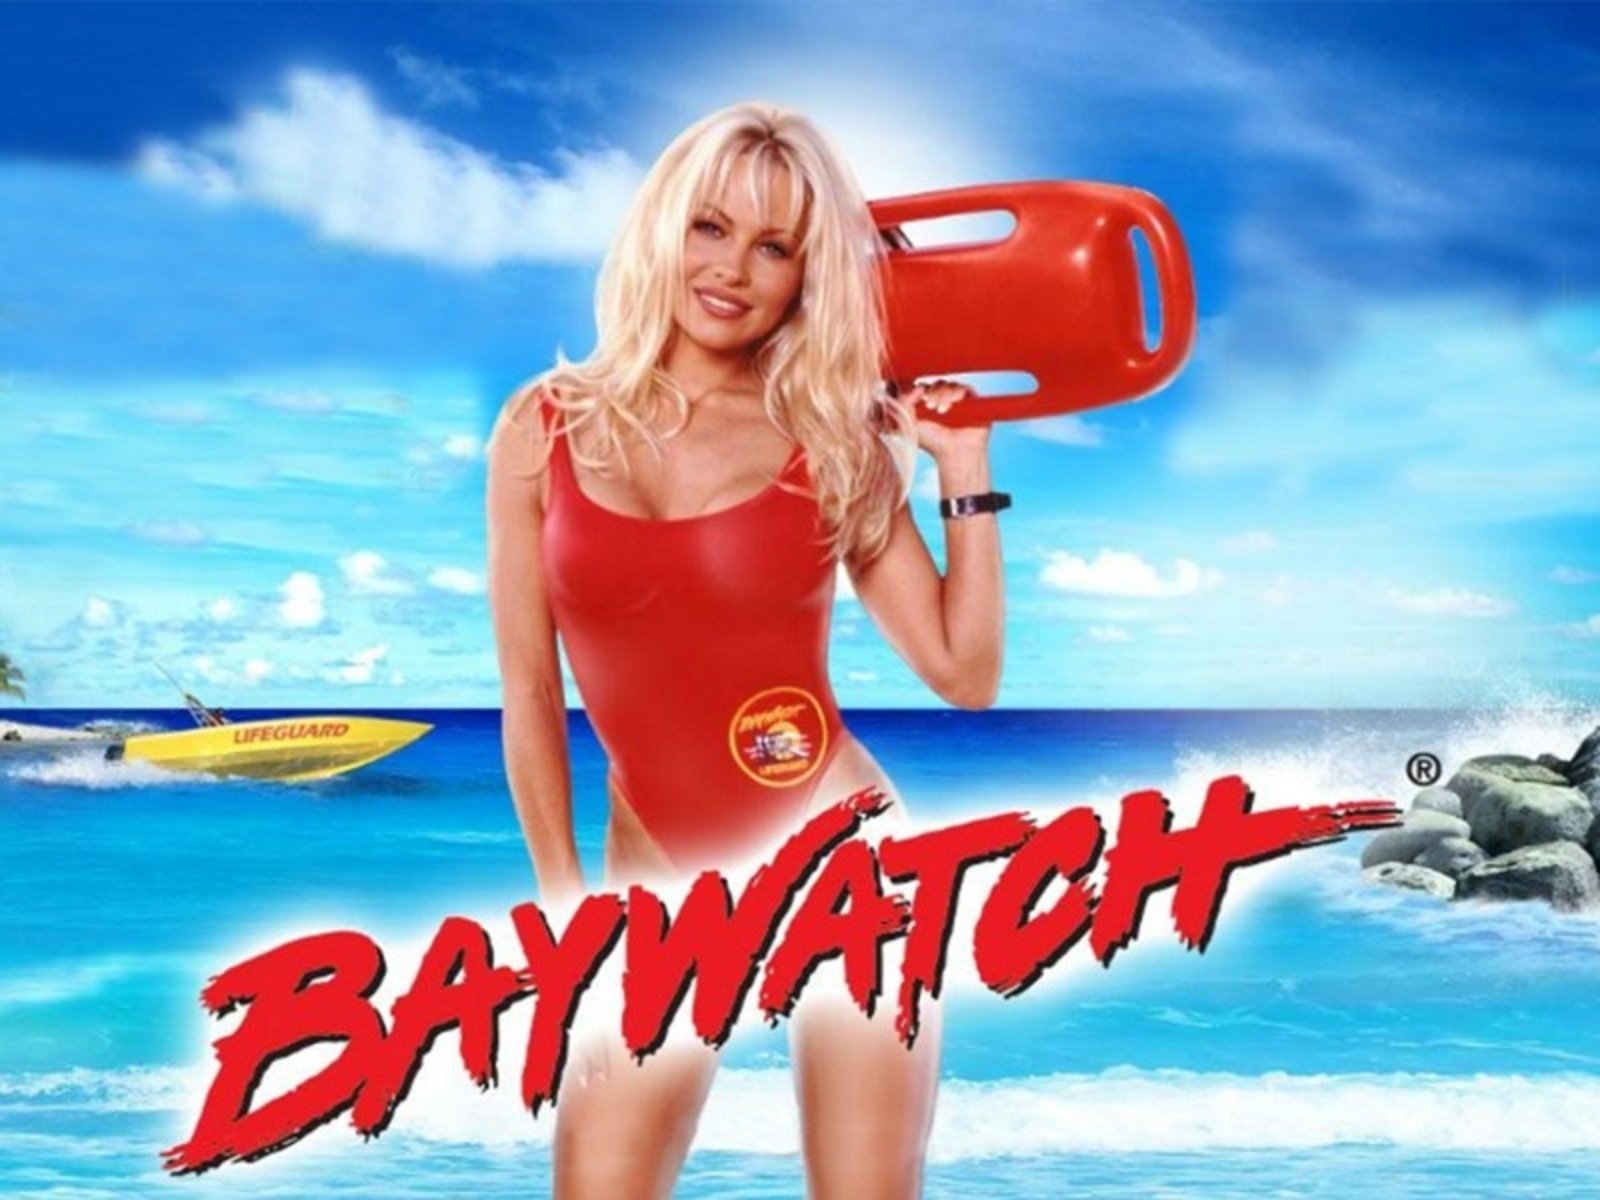 The Baywatch Online Slot Demo Game by Playtech